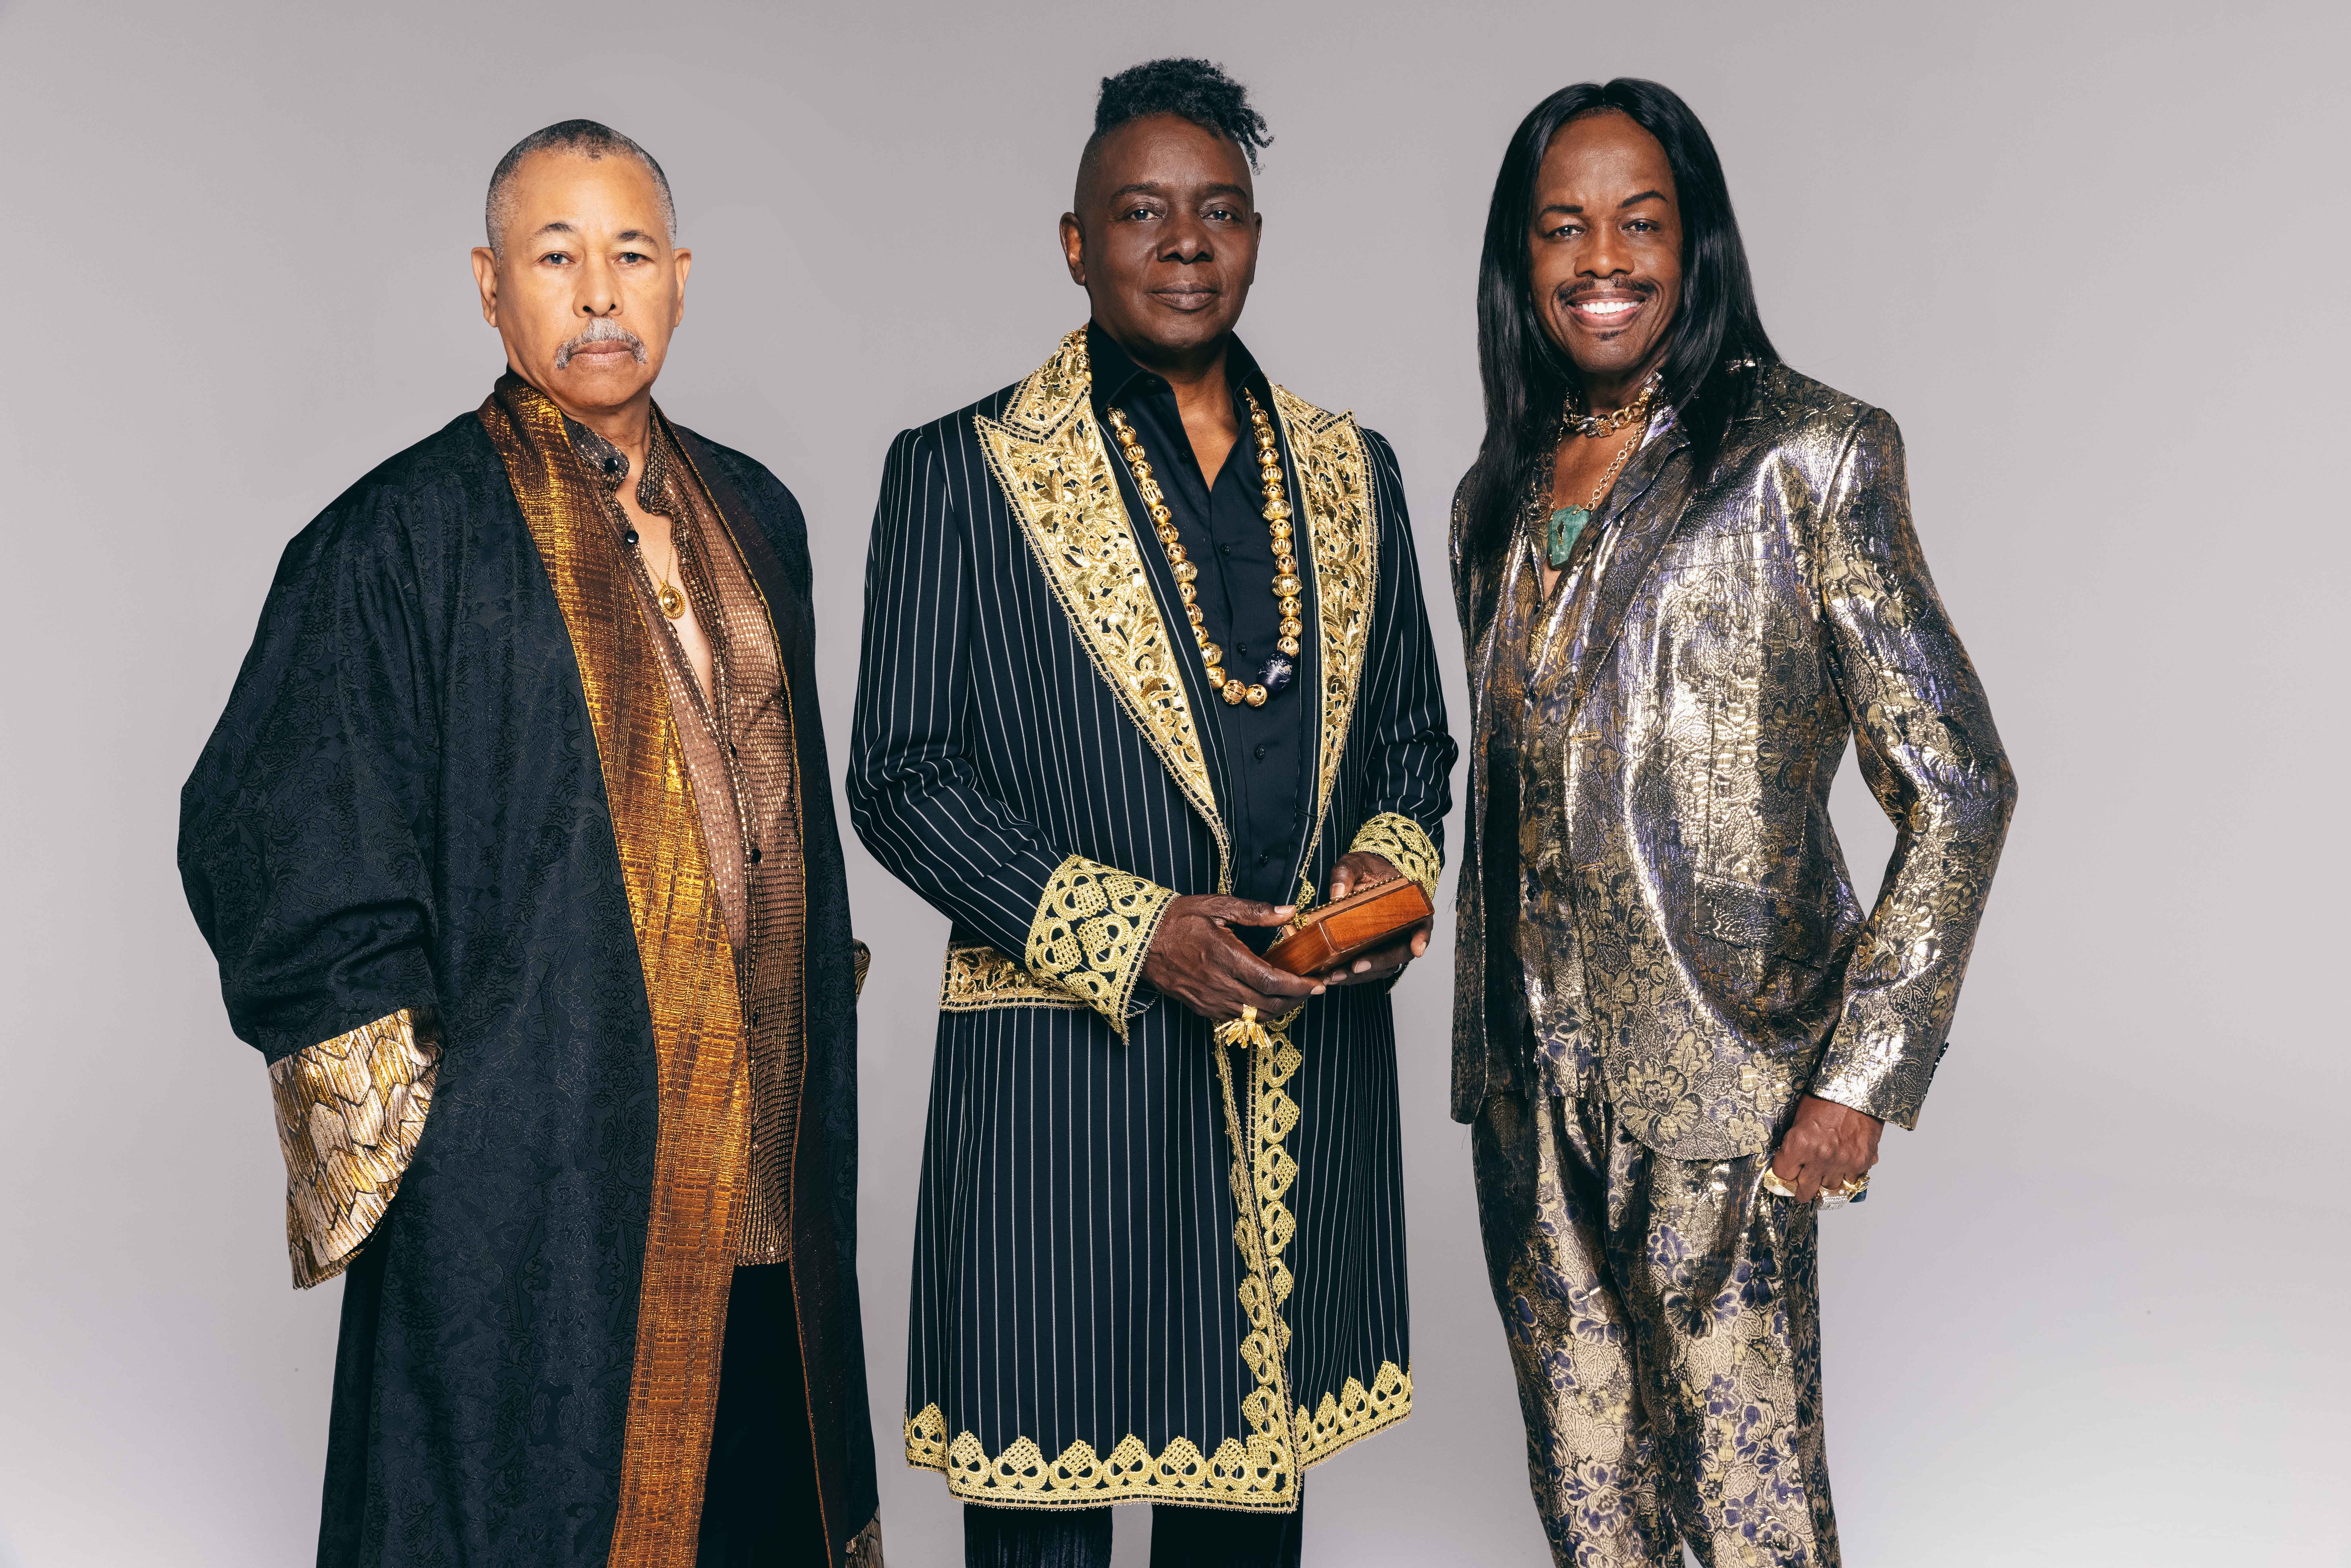 presale passcode to Earth, Wind & Fire face value tickets in Camdenton